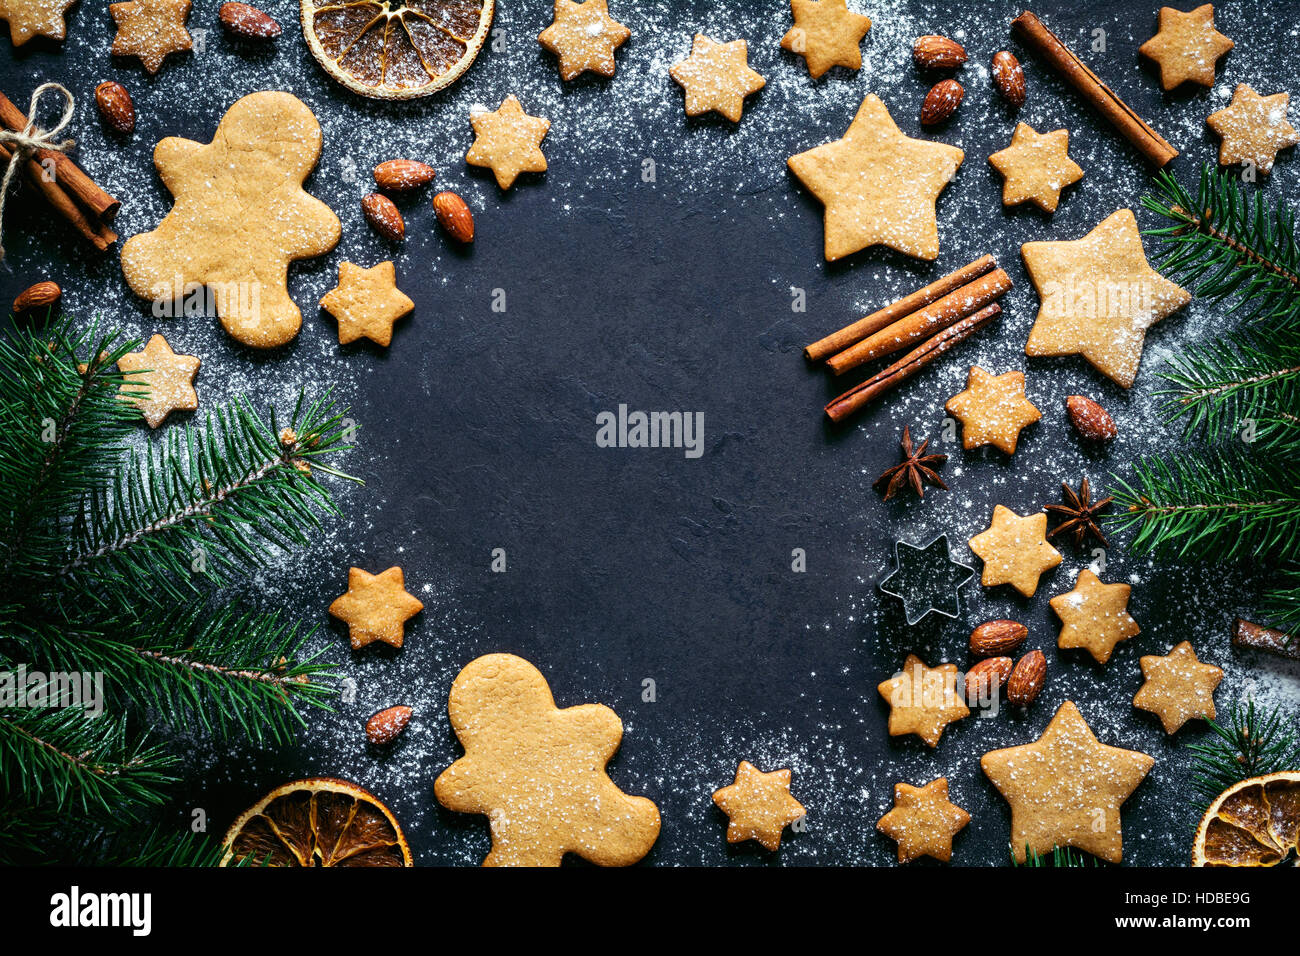 https://c8.alamy.com/comp/HDBE9G/christmas-or-new-year-background-with-gingerbread-cookies-gingerbread-HDBE9G.jpg